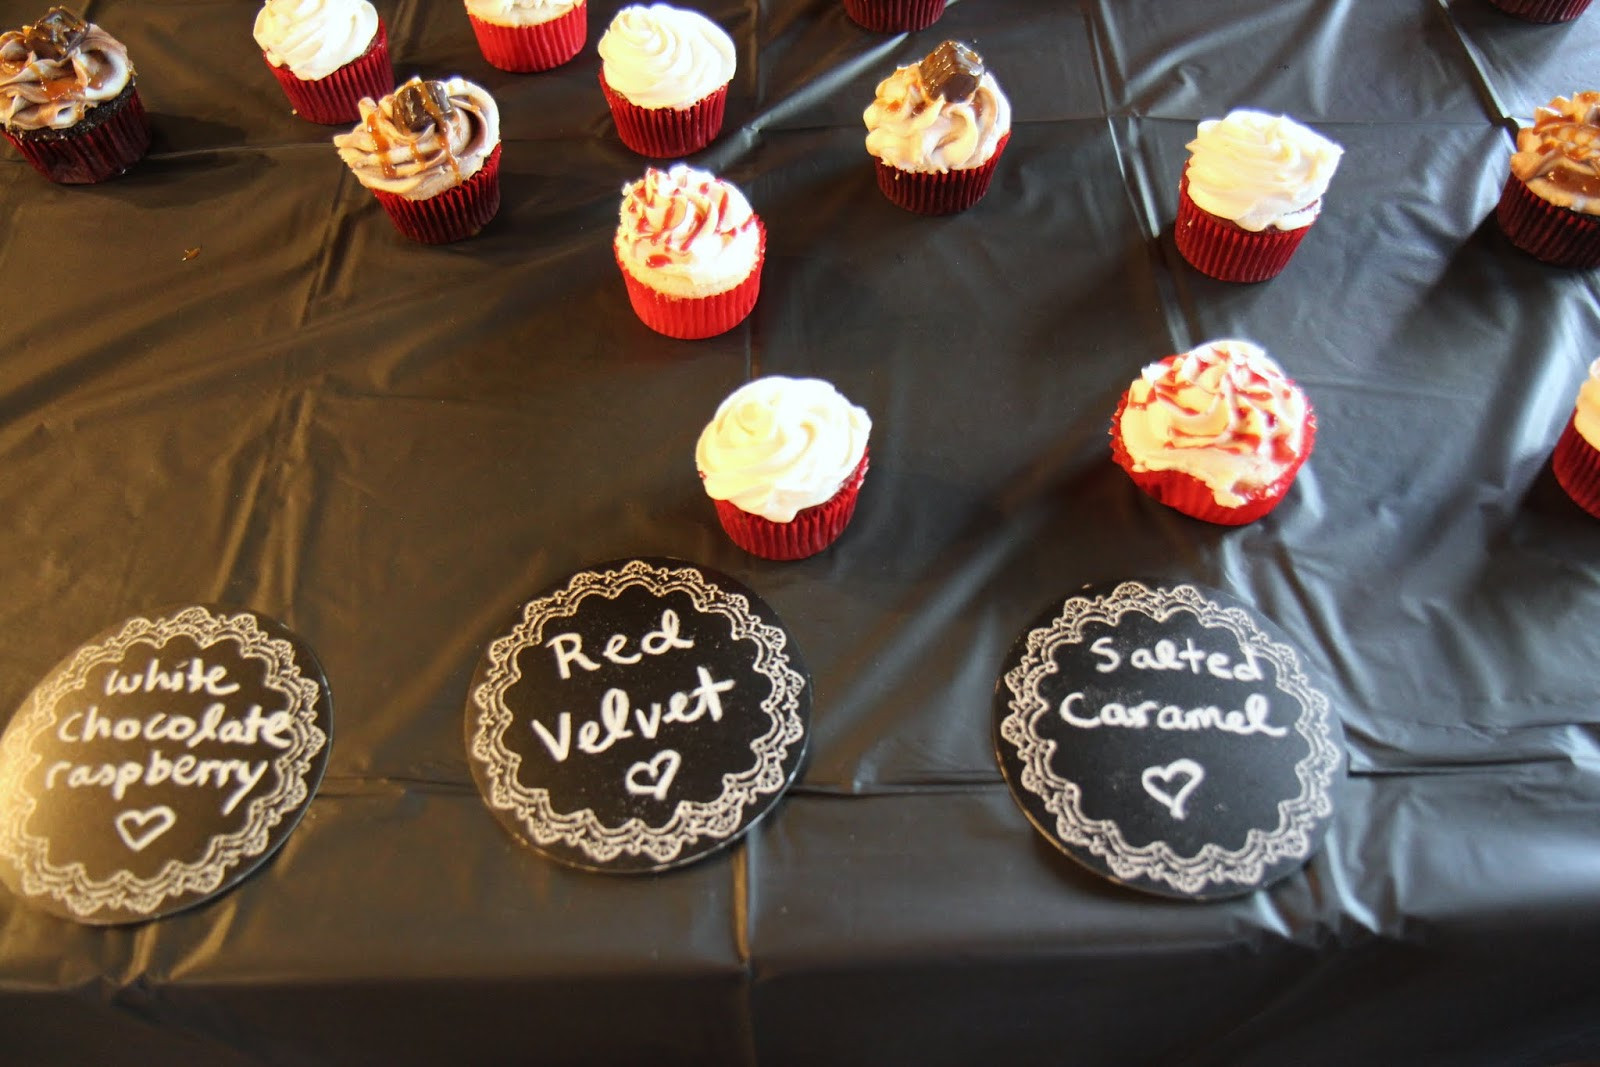 Inexpensive Graduation Party Food Ideas
 Cheap Graduation Party Food Ideas Menu for 100 Lille